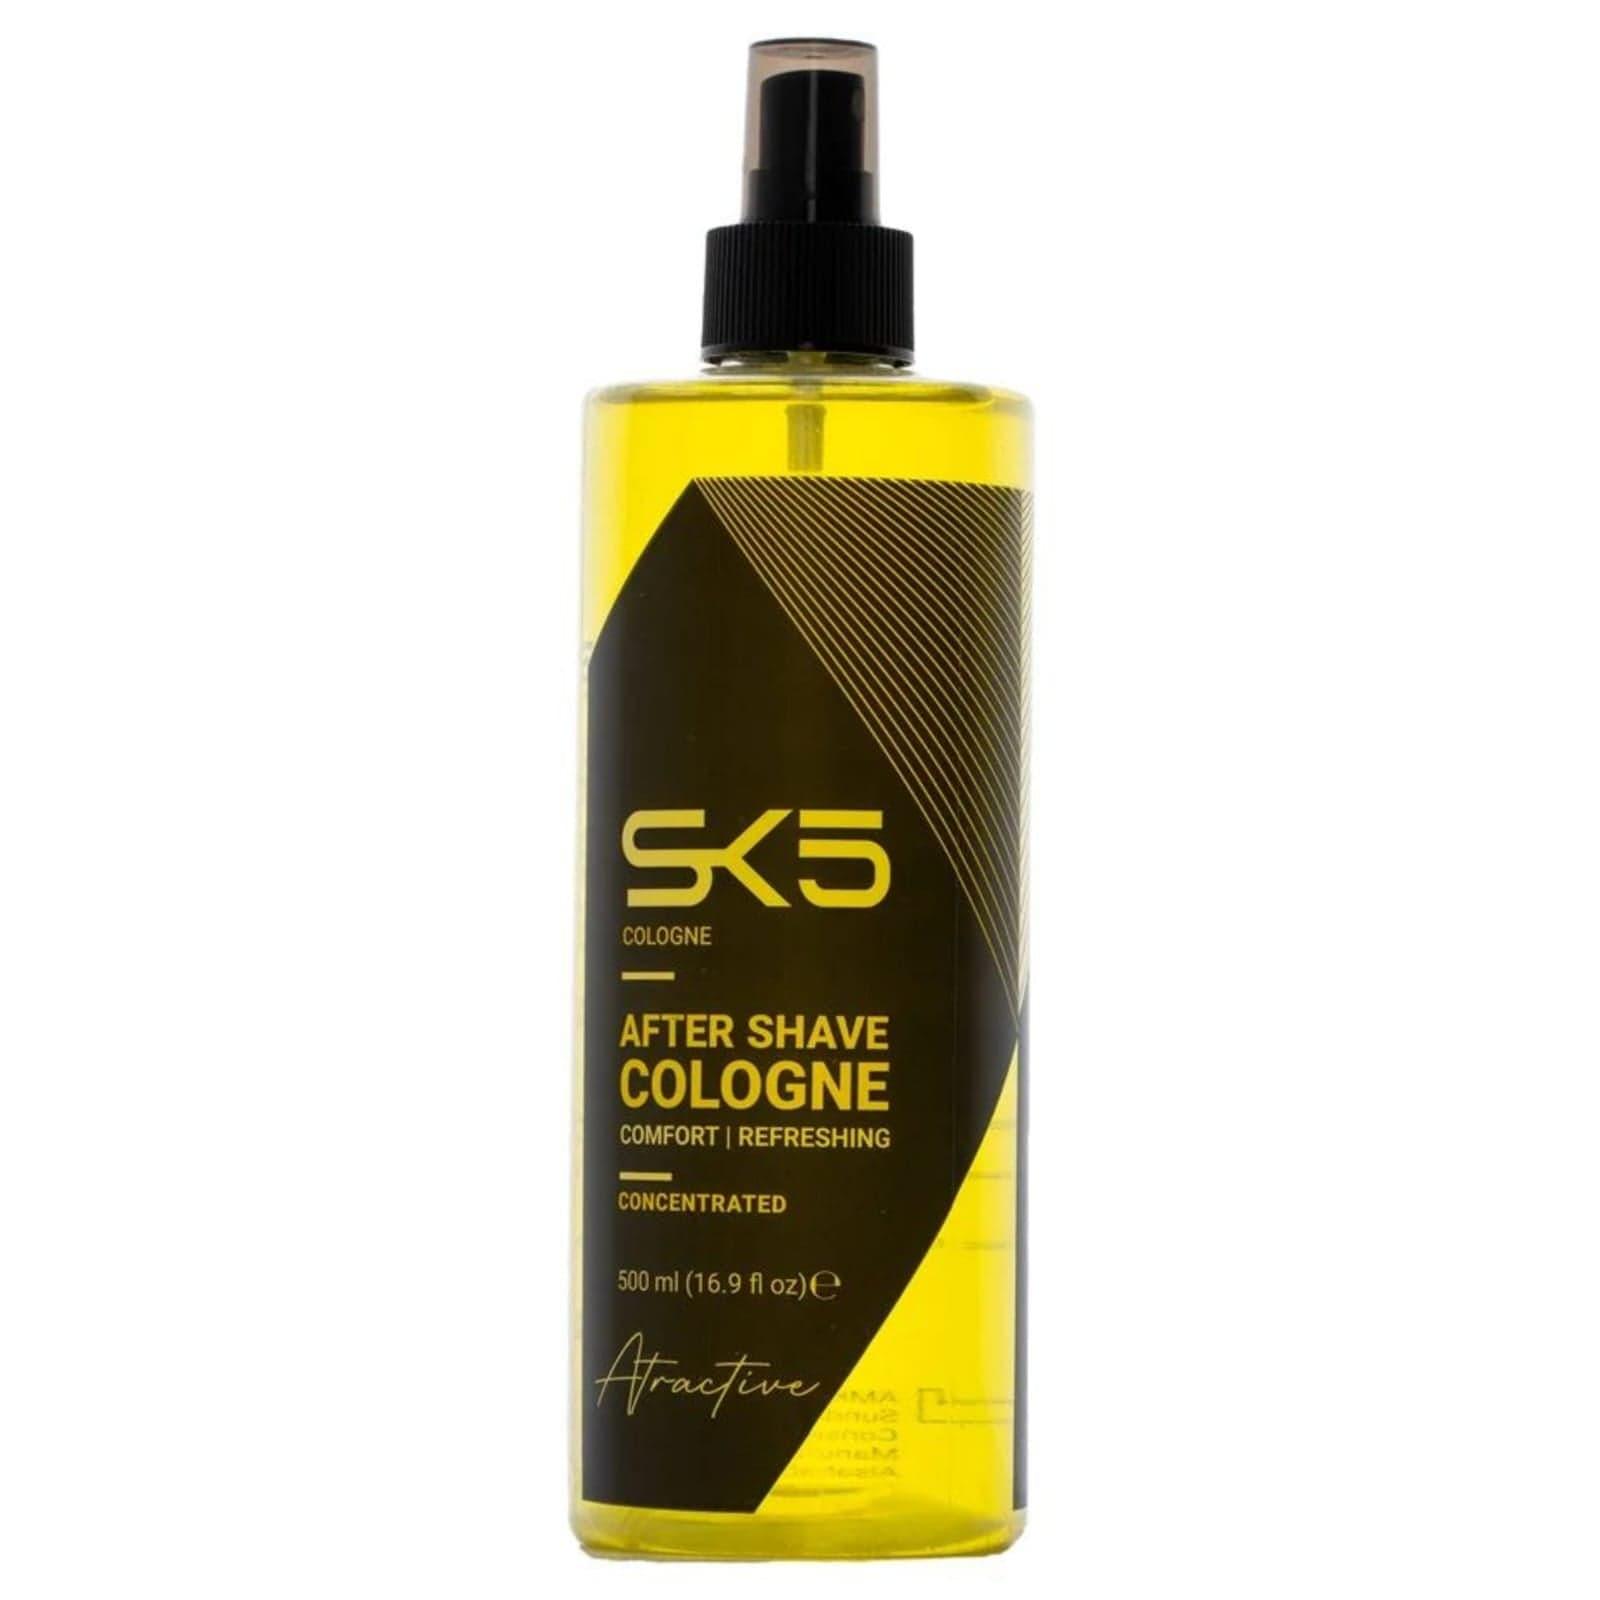 SK5 After Shave Cologne Attraction 500ml